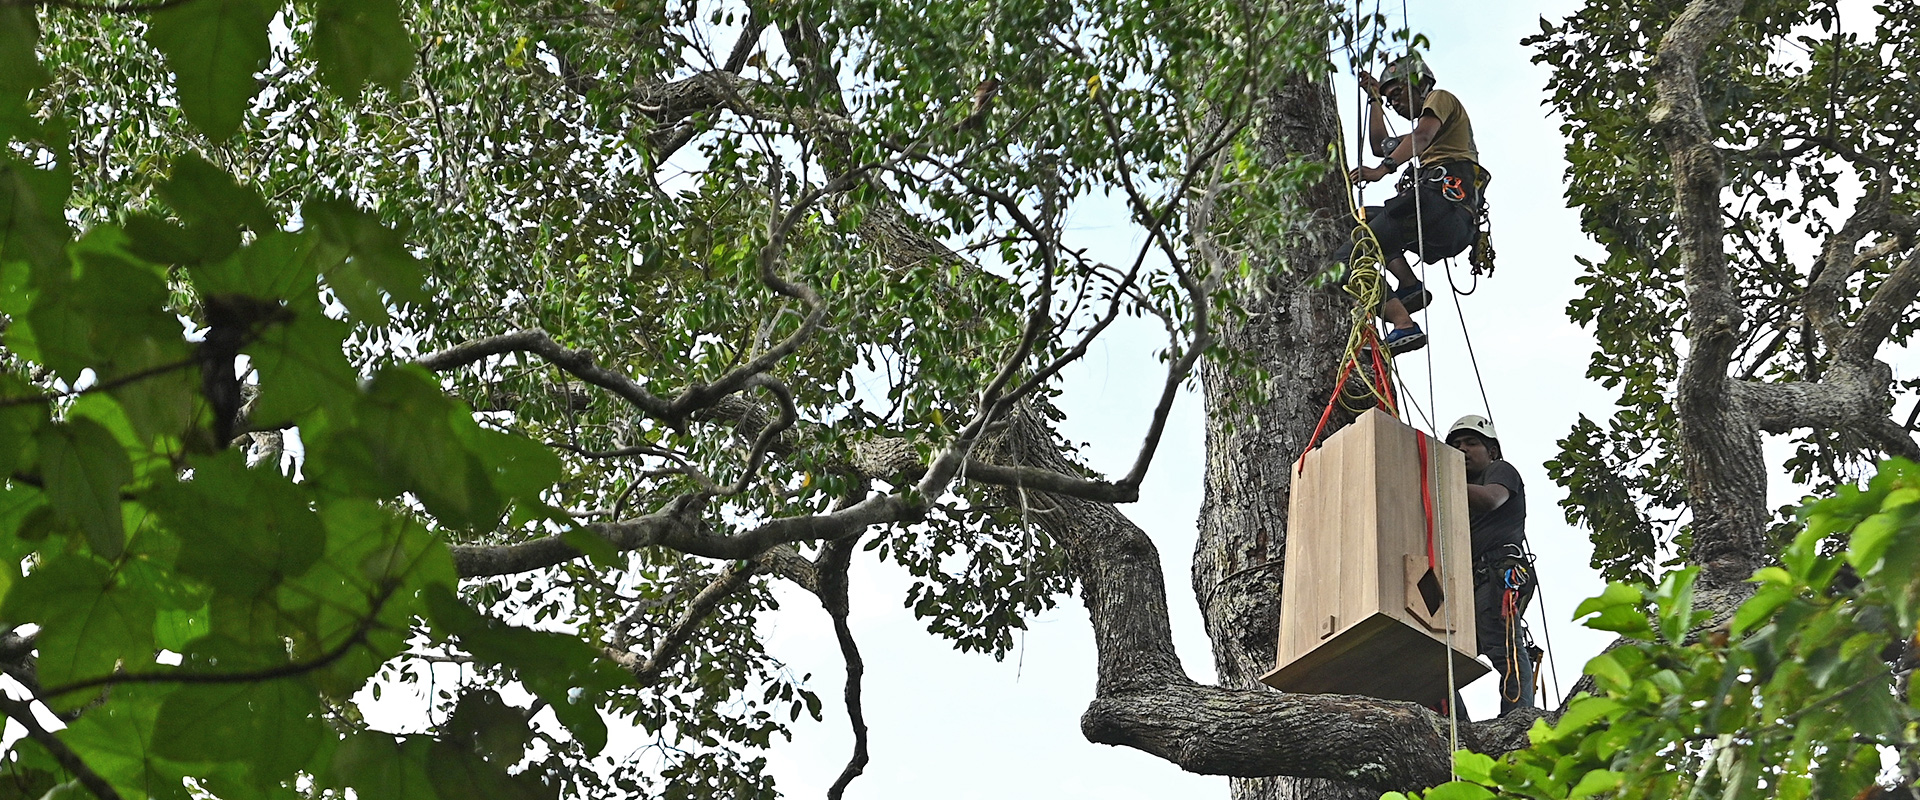 Installing an artificial nesting box for the Great Hornbill